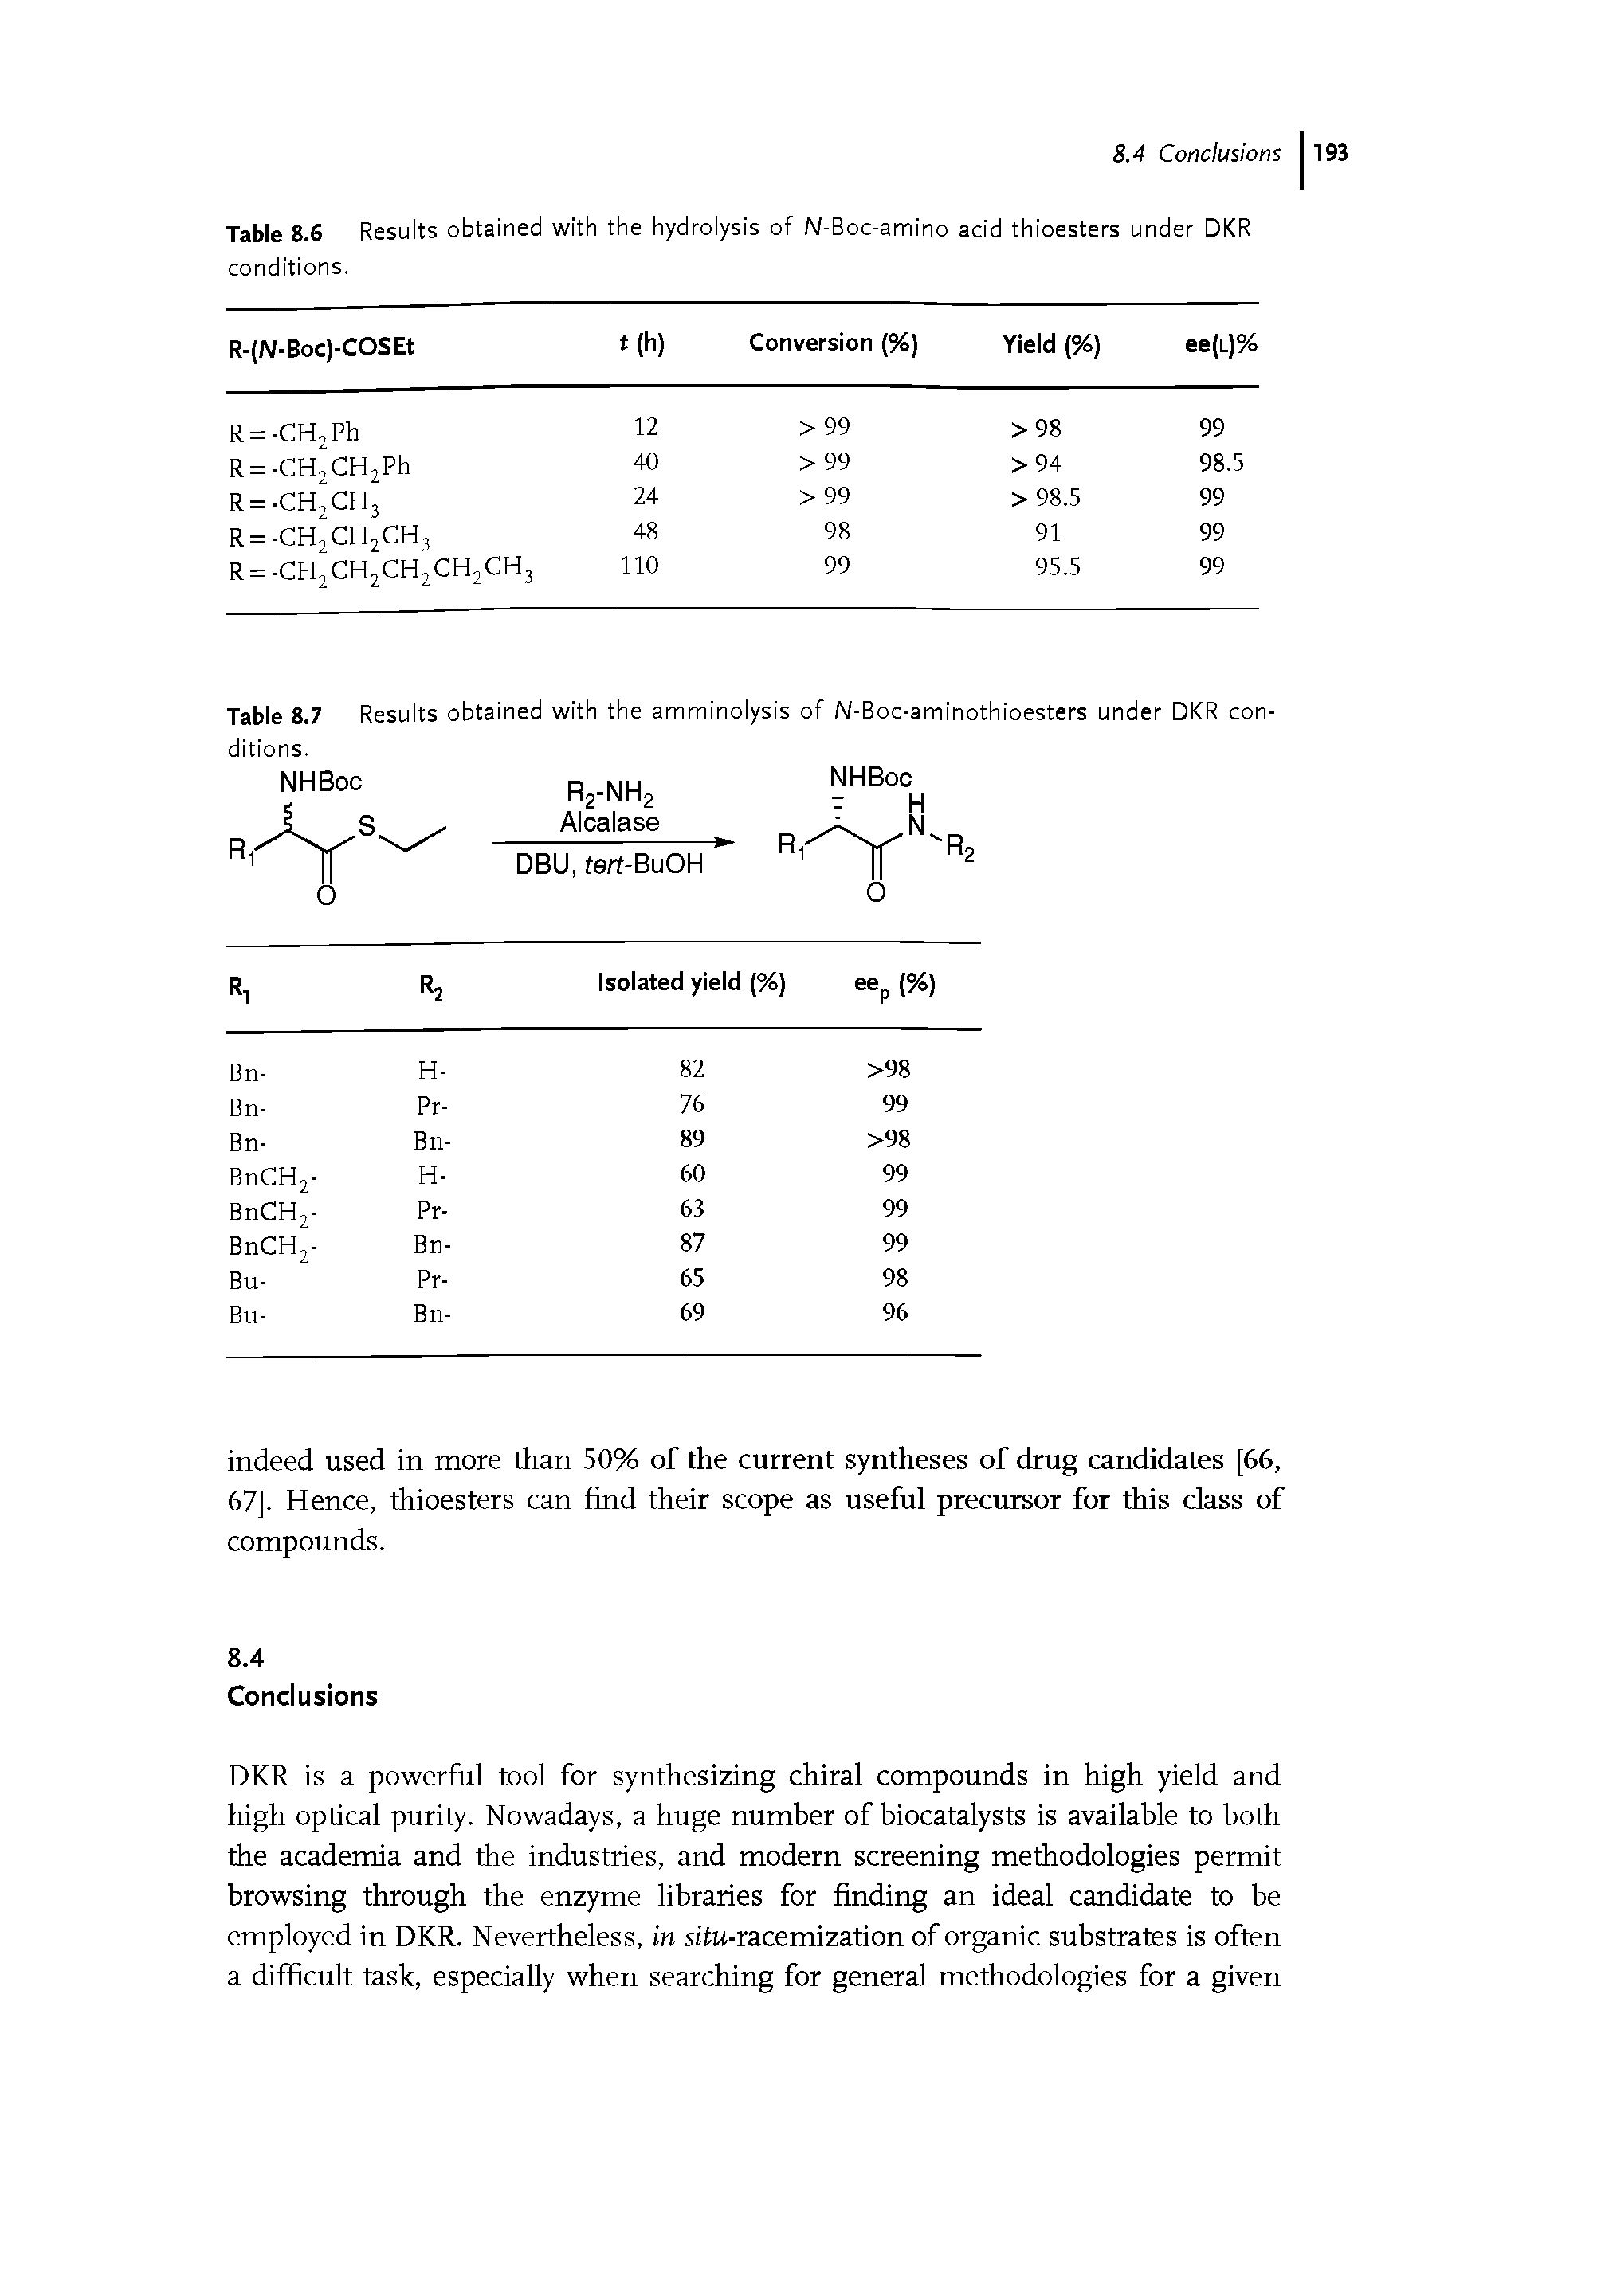 Table 8.6 Results obtained with the hydrolysis of N-Boc-amino acid thioesters under DKR conditions.